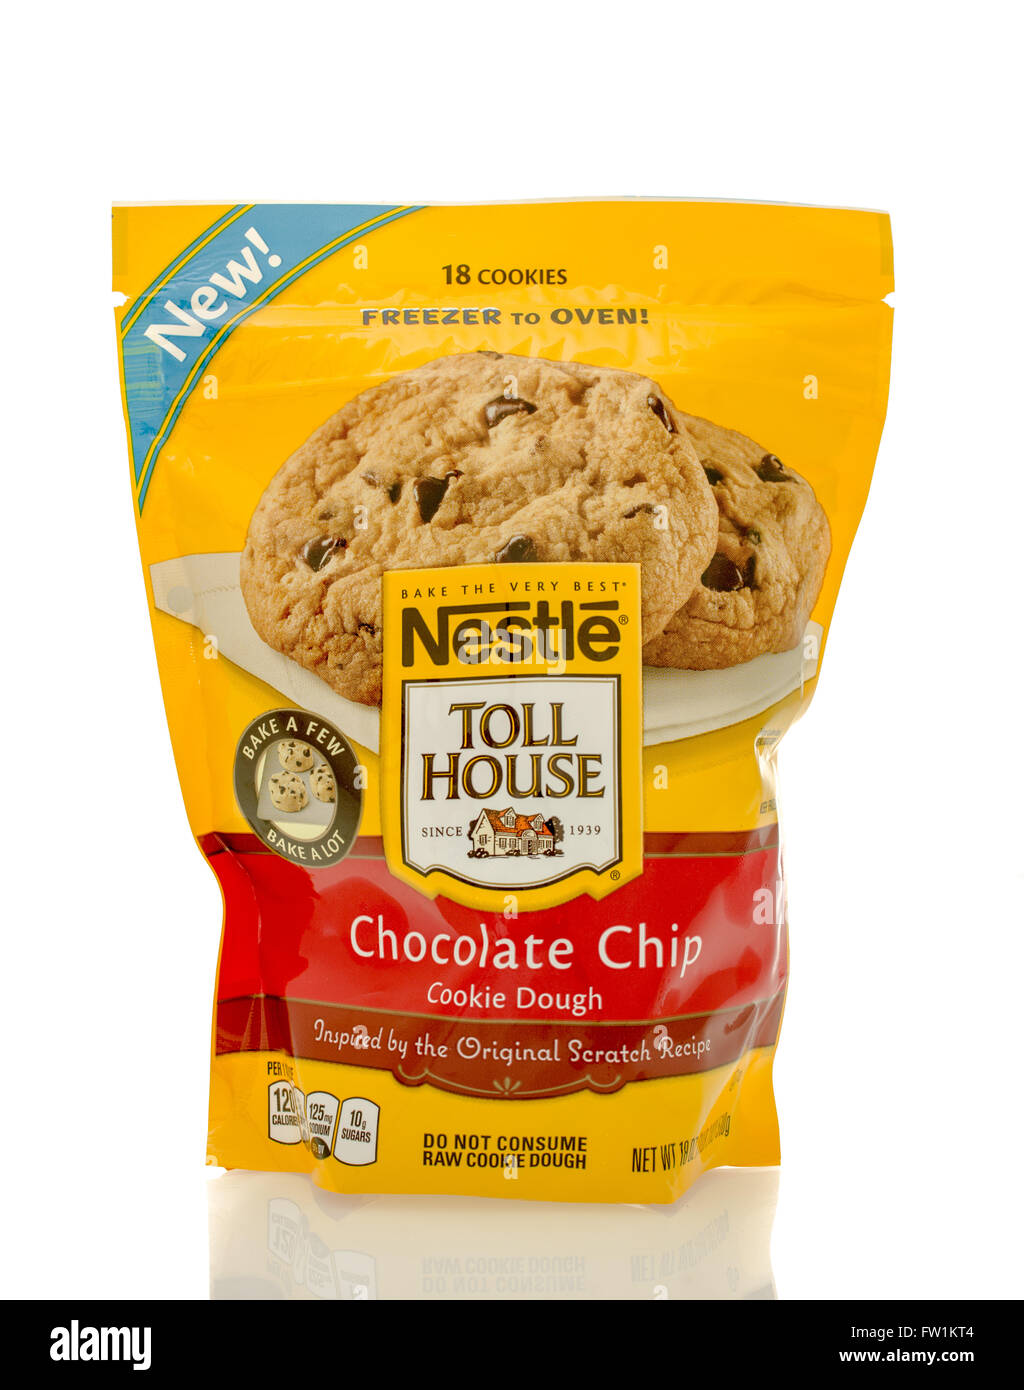 Winneconne, WI - 30 March 2016: Bag of Nestle Toll House chocolate chip cookie dough Stock Photo